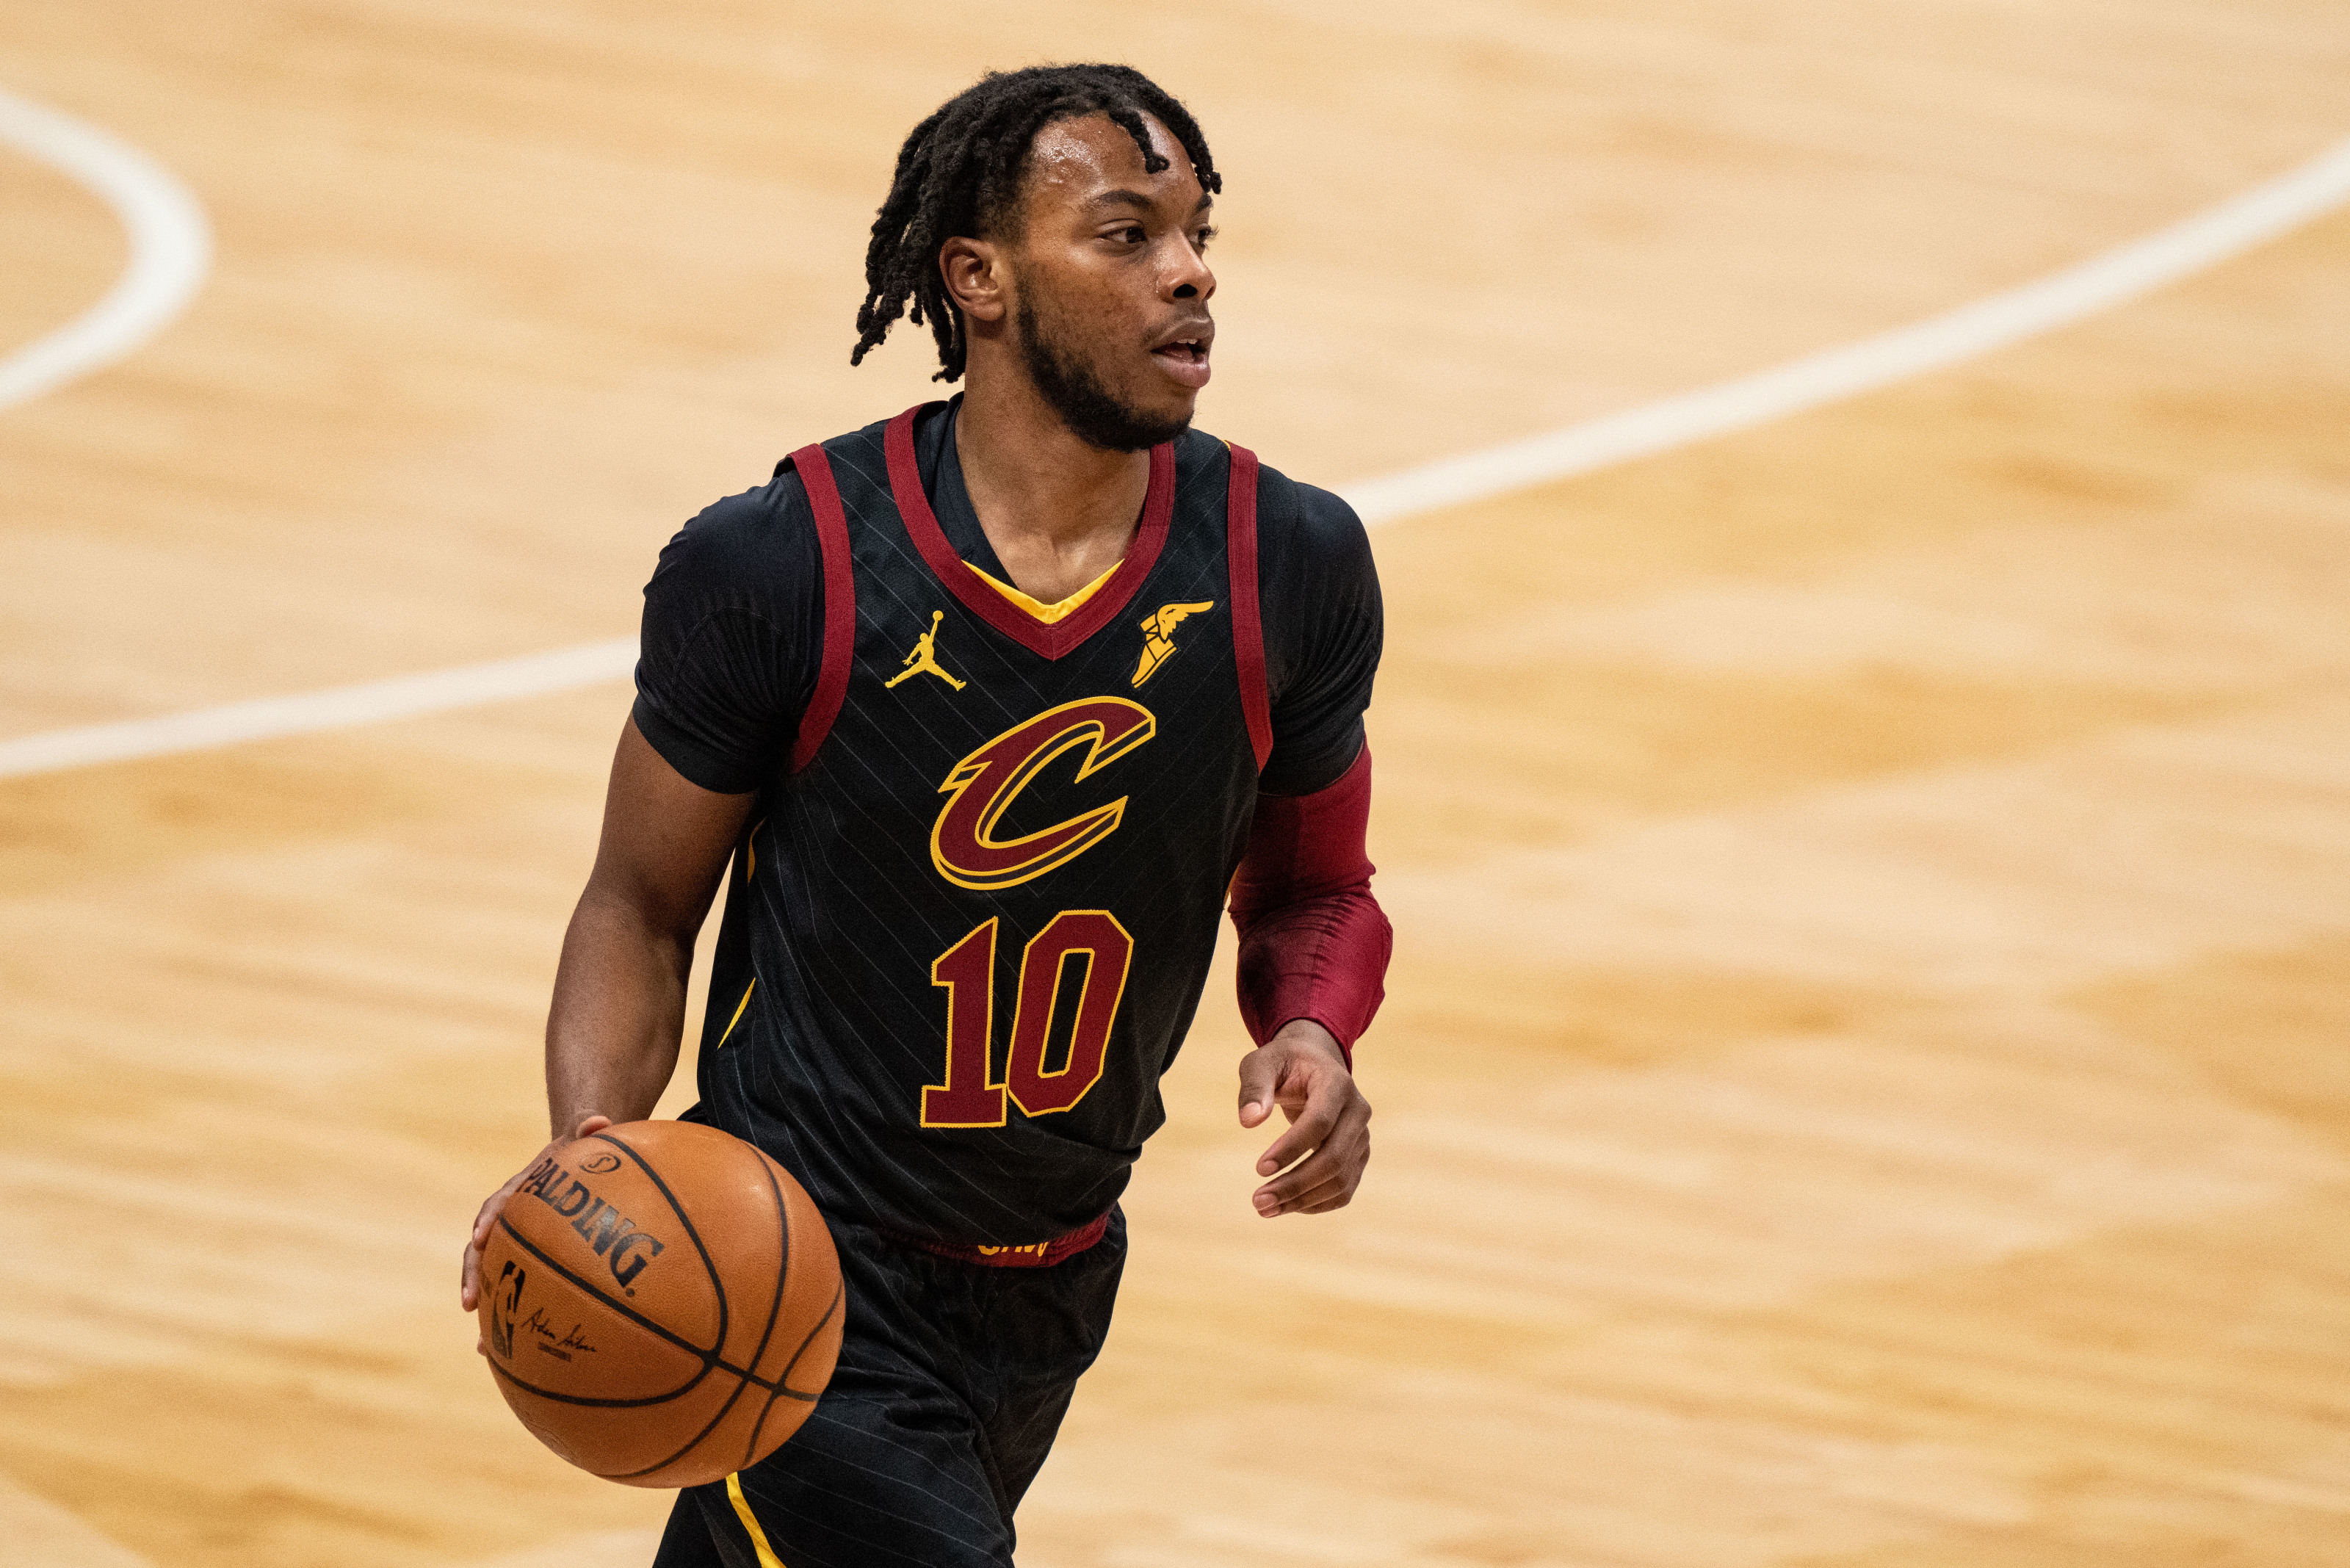 Cavs Nation - Darius Garland in a Cavs jersey 😲👍